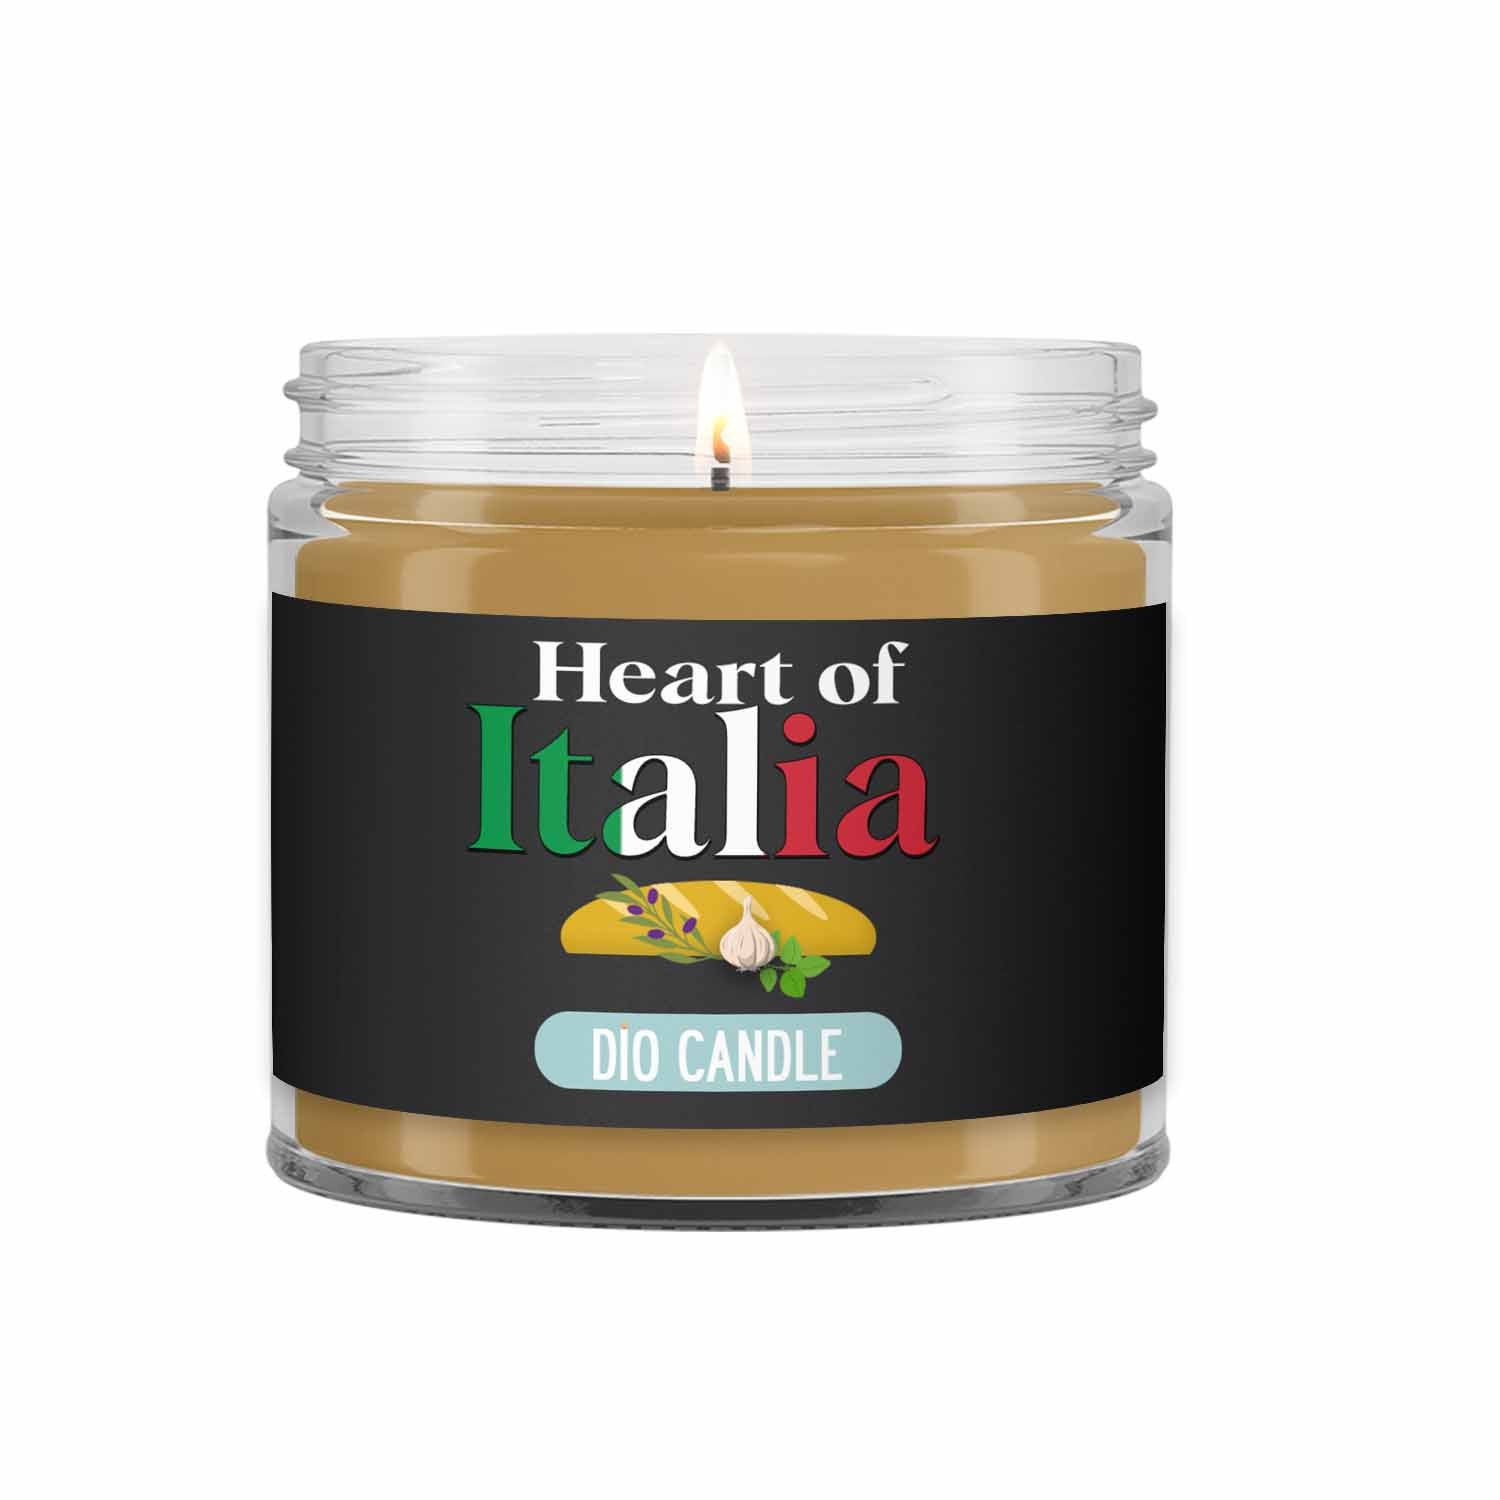 Garlic Scented Candle